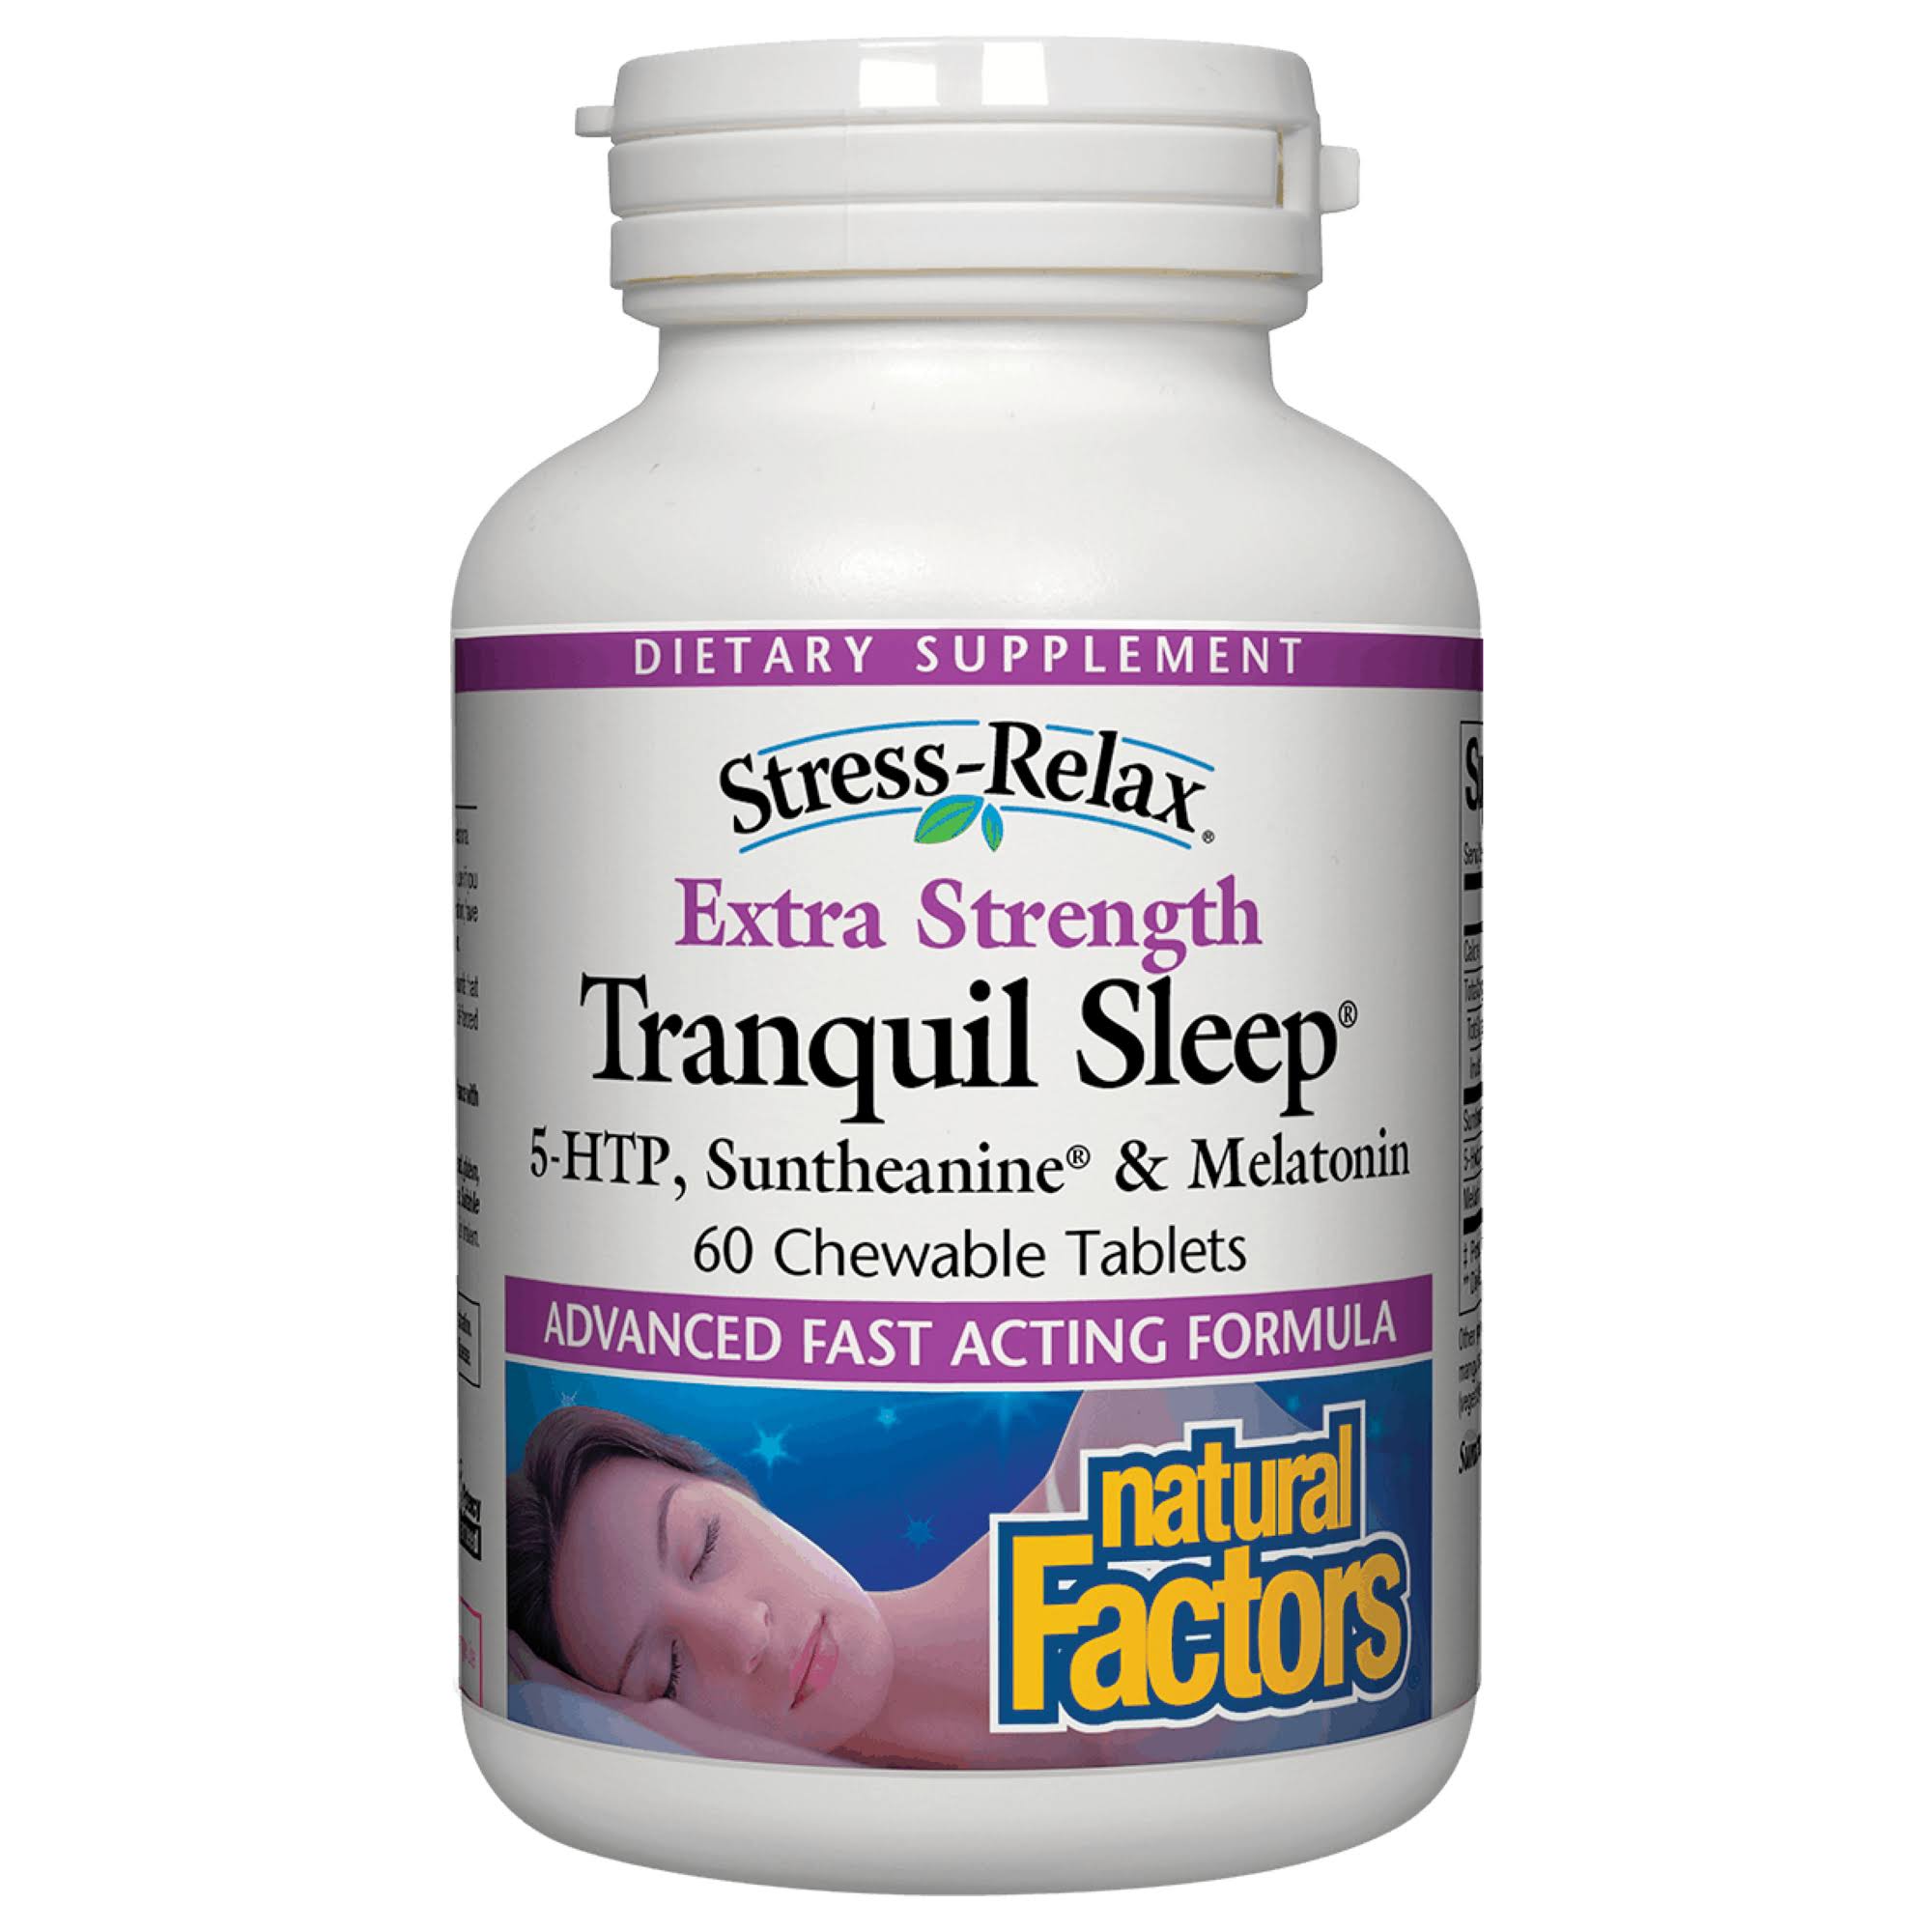 Natural Factors Tranquil Sleep Extra Strength Dietary Supplement - 60 Tablets